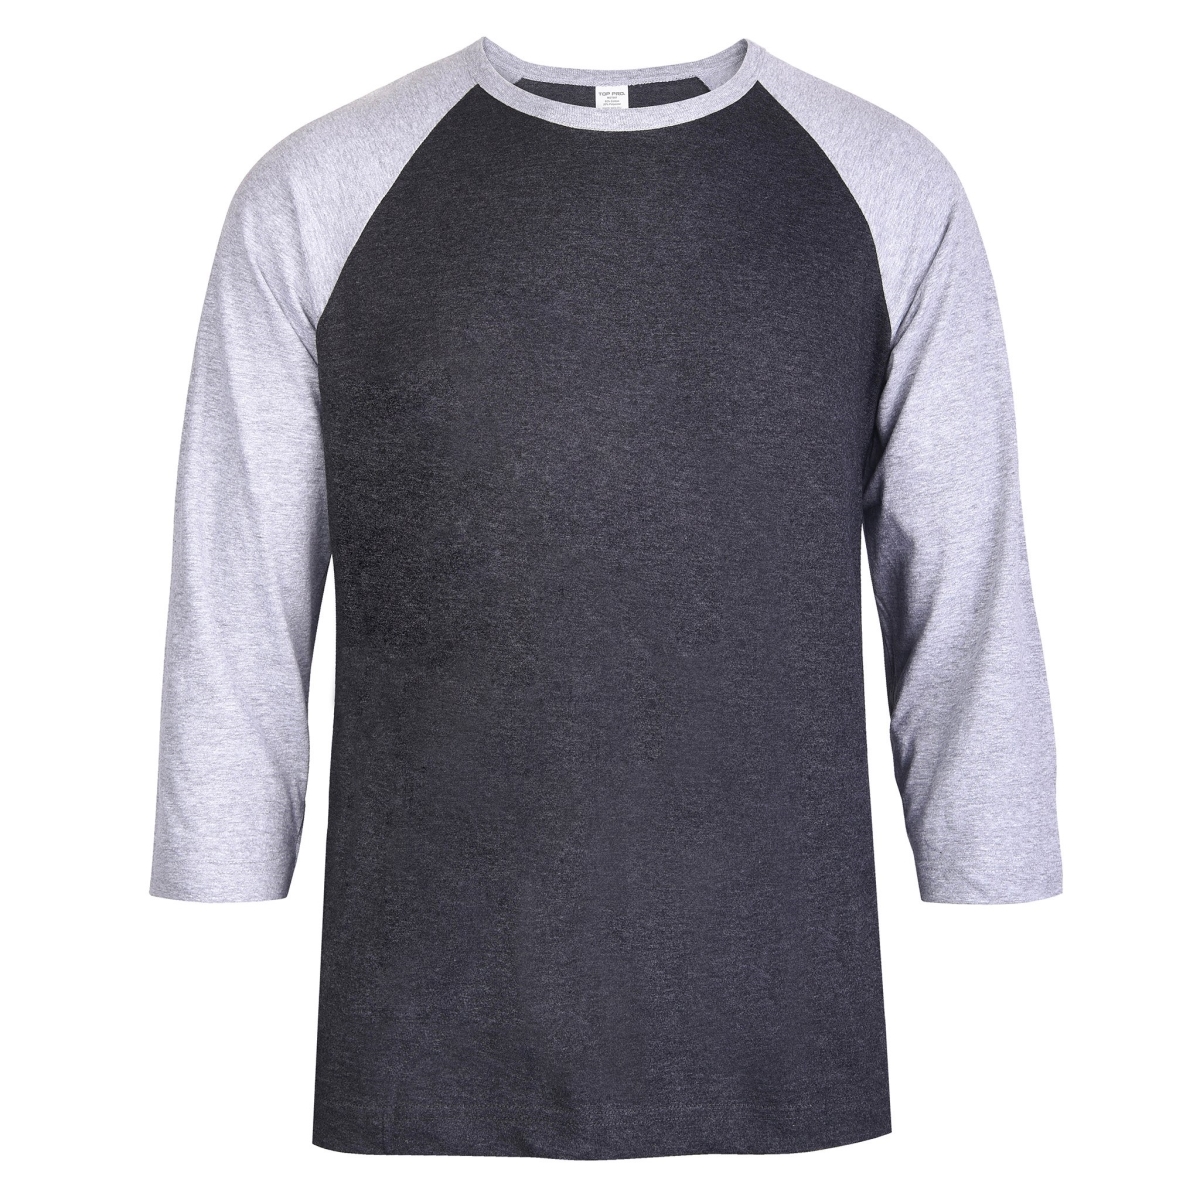 Picture of 247 Frenzy 247-MBT001 HCG-LG Mens Essentials Top Pro 0.75 Sleeve Raglan Baseball T-Shirt&#44; Heather Charcoal Gray - Large